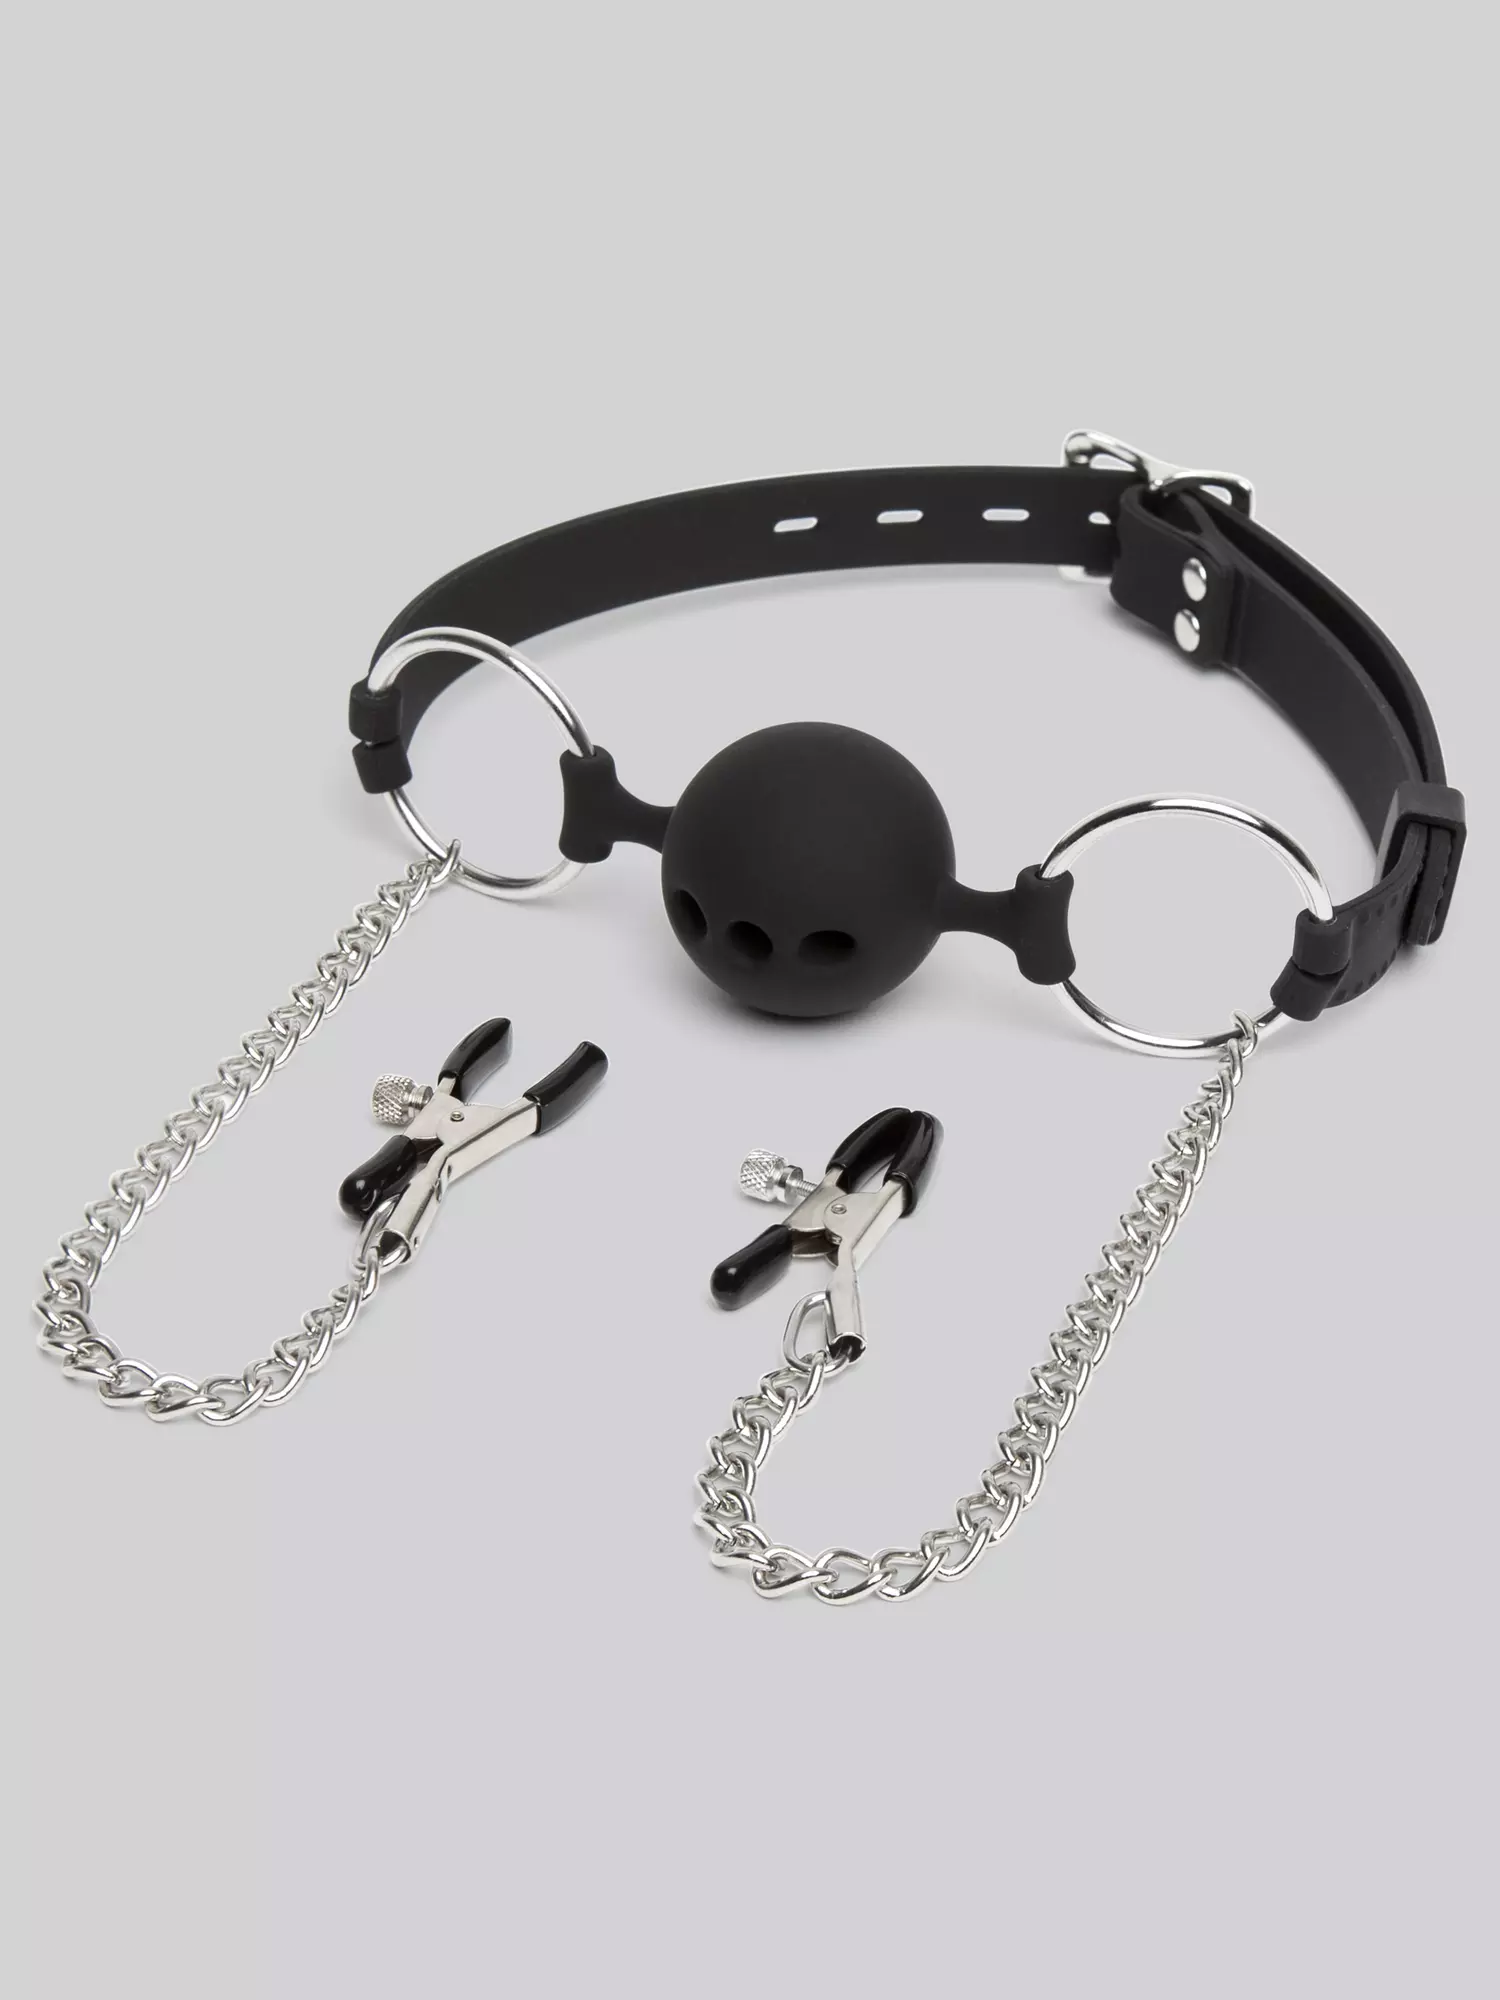 DOMINIX Deluxe Large Gag with Nipple Clamps. Slide 10